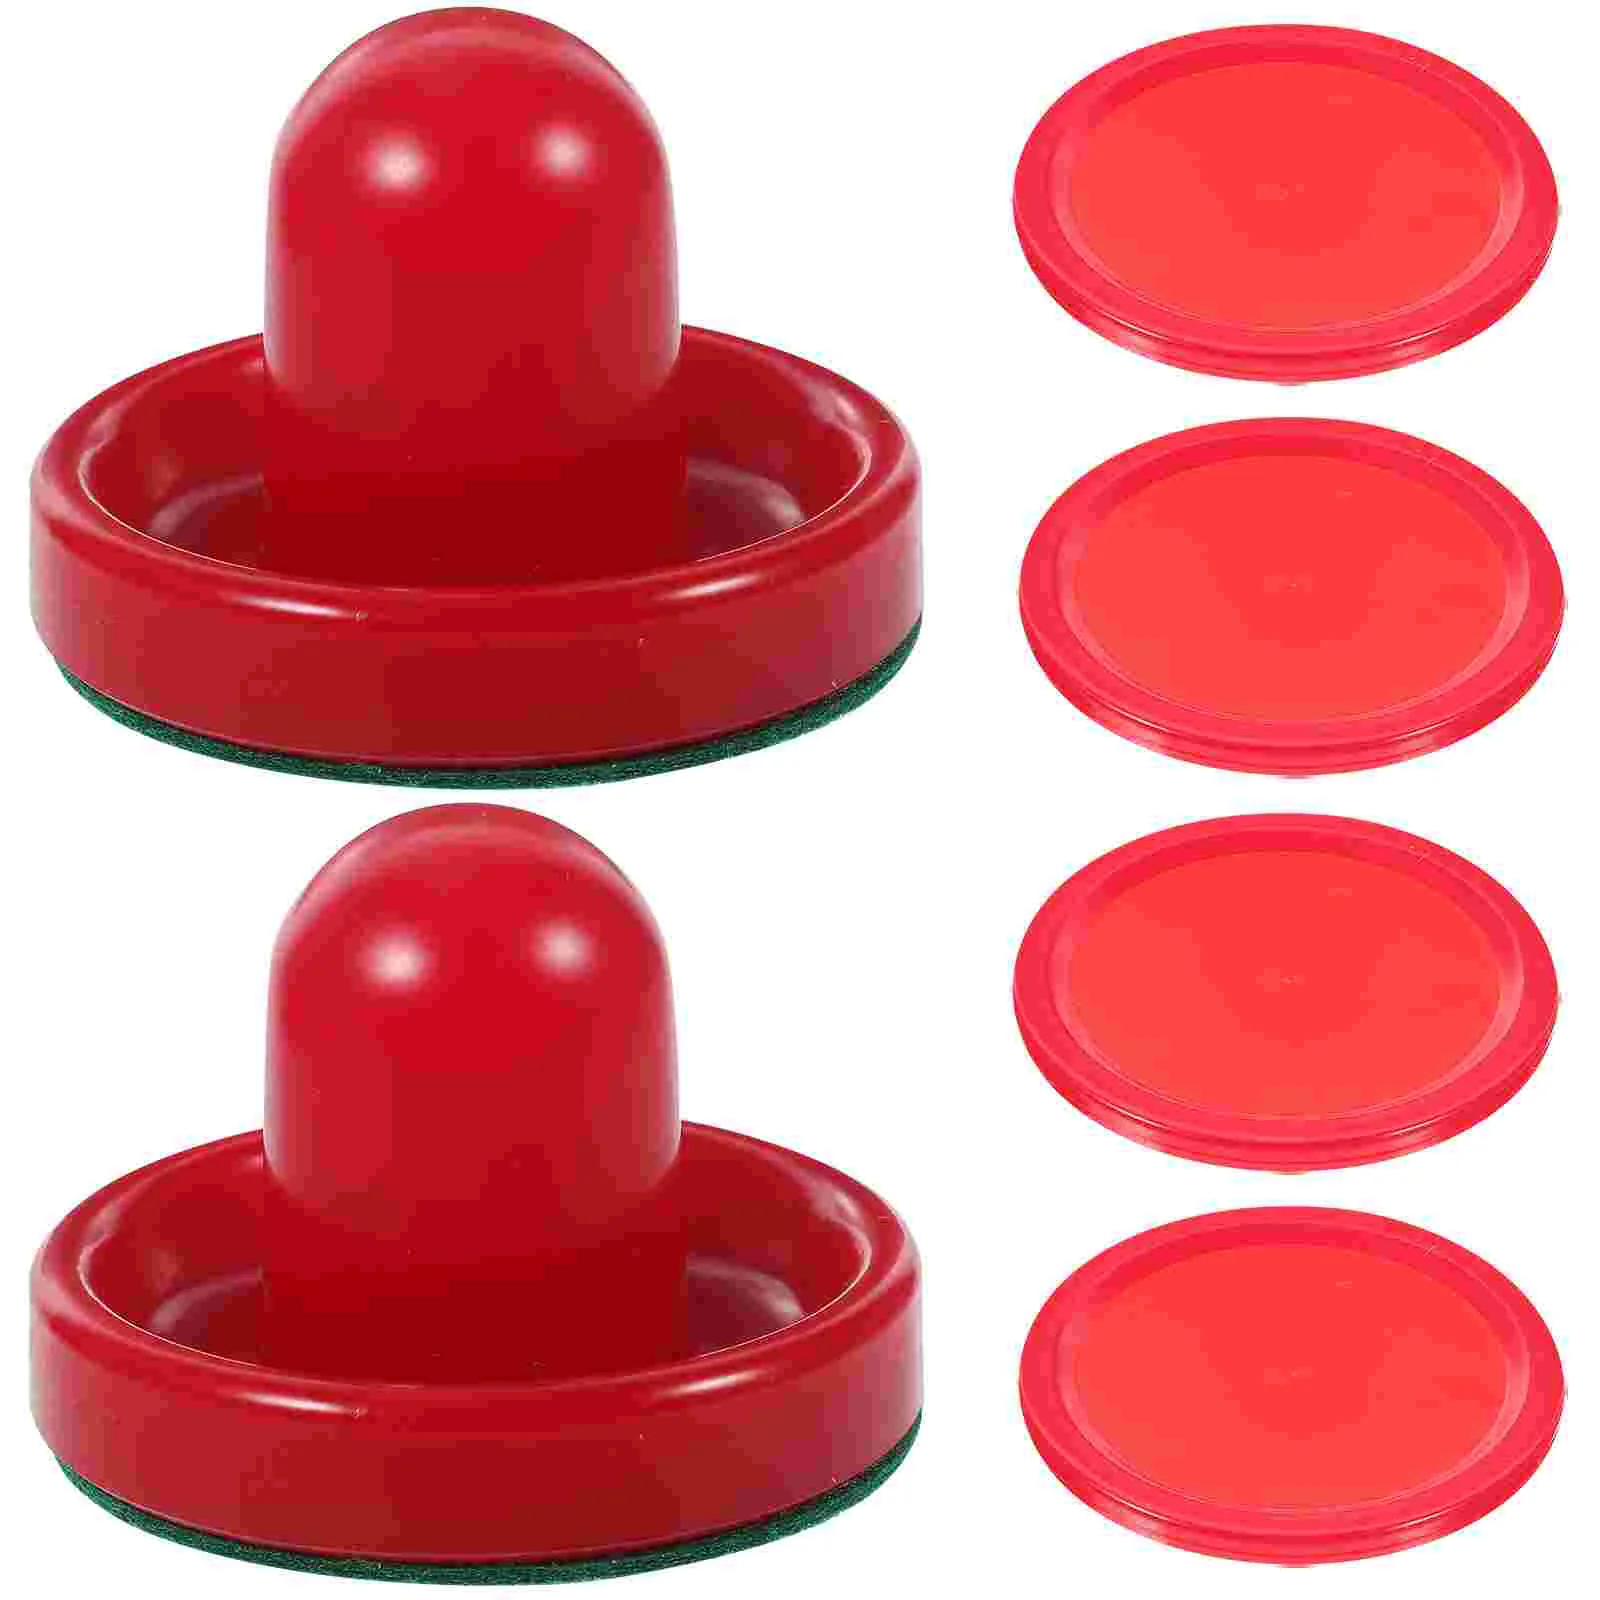 

8PCS 76MM Air Hockey Pushers Pucks Replacement for Game Tables Goalies Header Kit Air Hockey Equipment Accessories (Red)